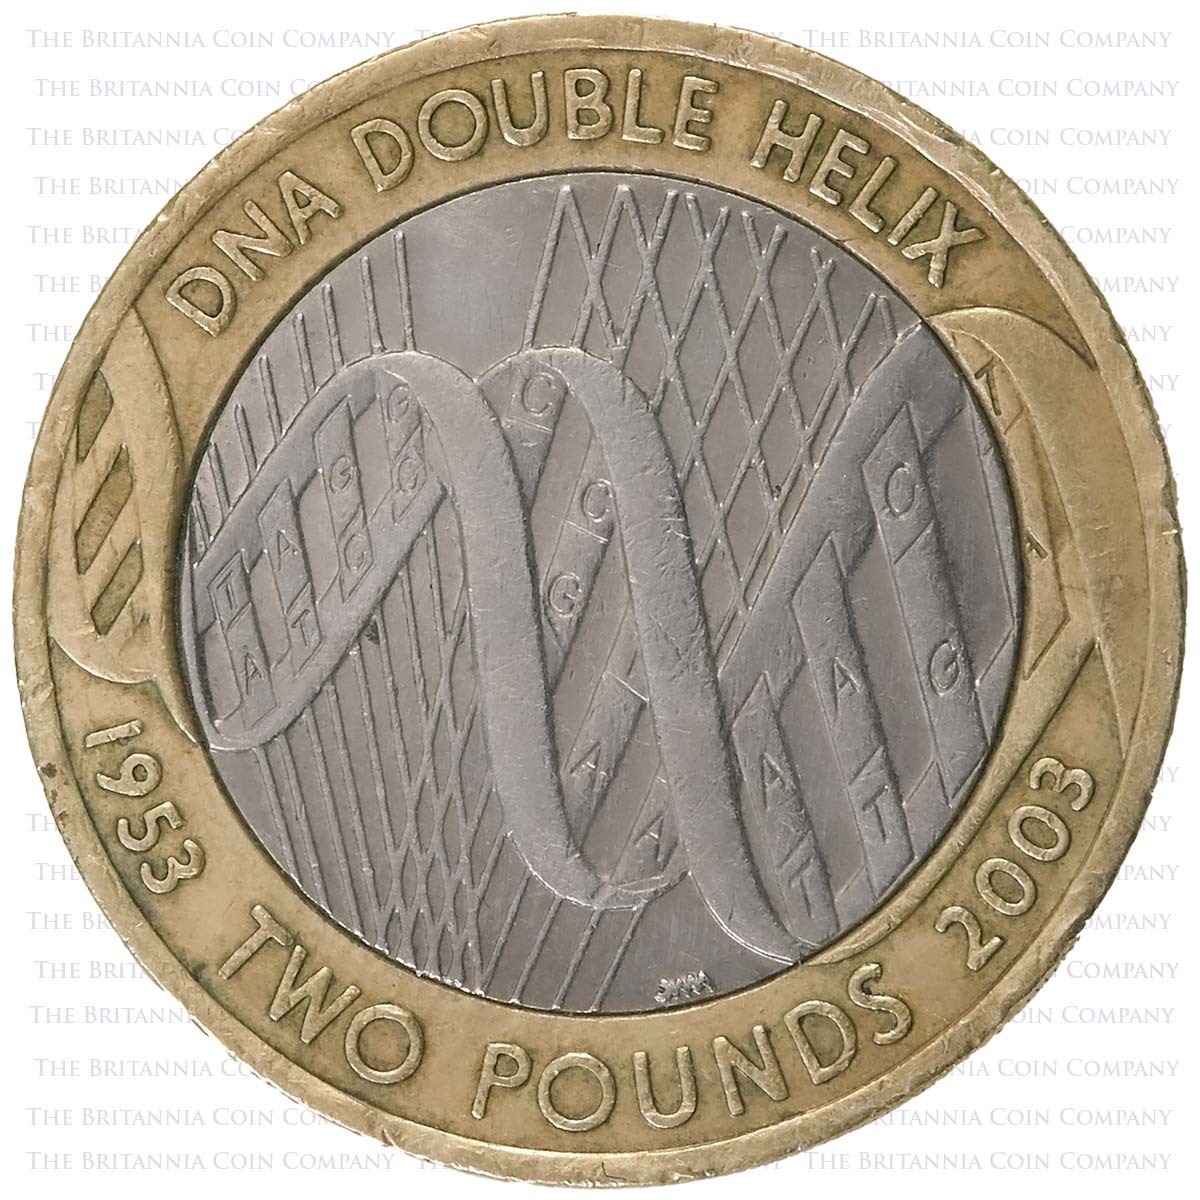 2003 DNA Double Helix Circulated Two Pound Coin Reverse